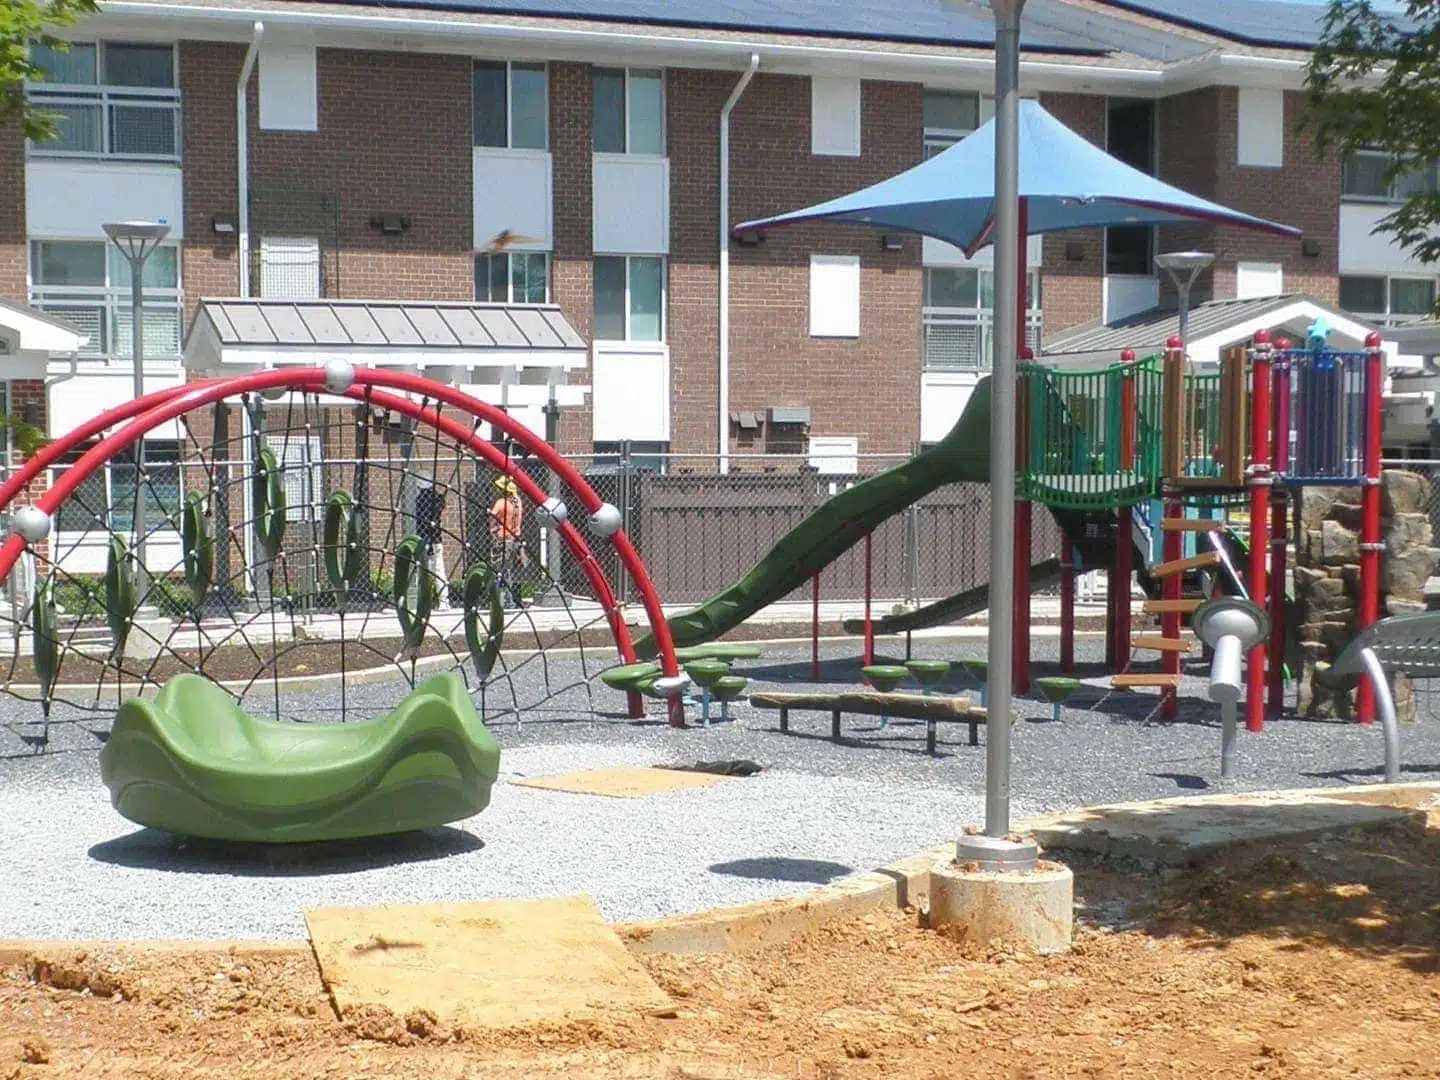 A playground in front of a Trex Seclusions Fence at the Parkway Overlook Apartments complex in Washington DC